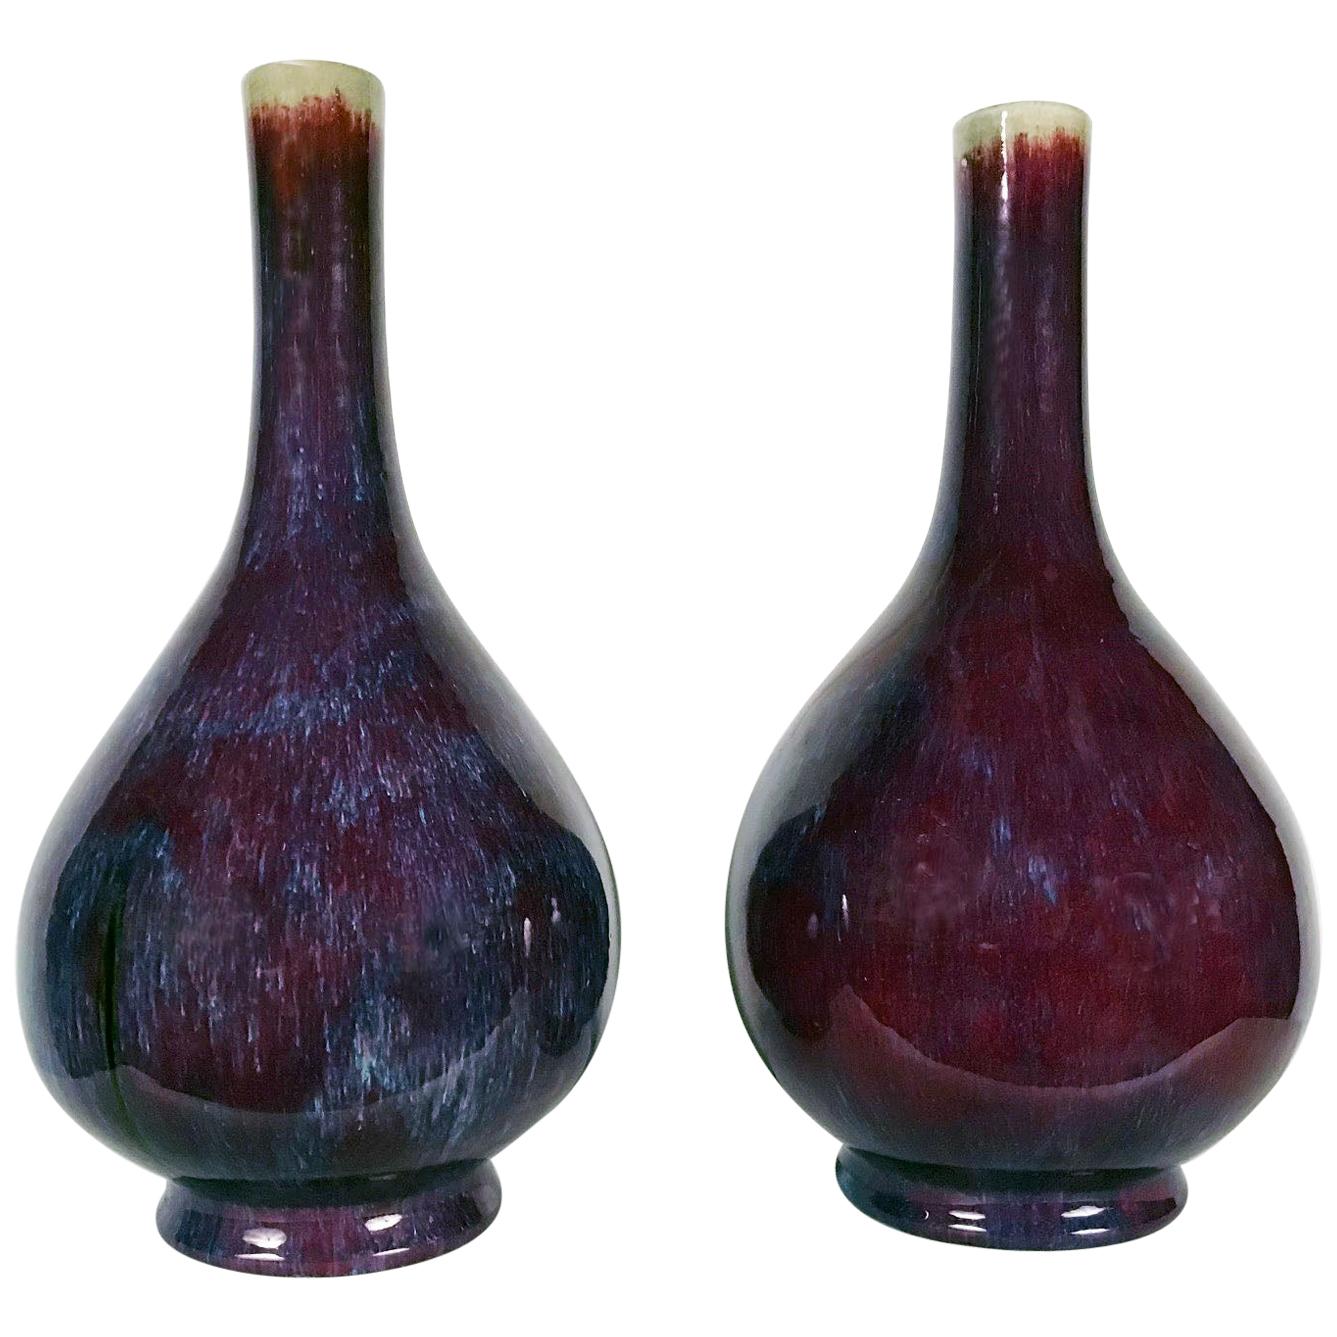 Large Pair of Antique Chinese Sang Boeuf Pear-Shaped Vases